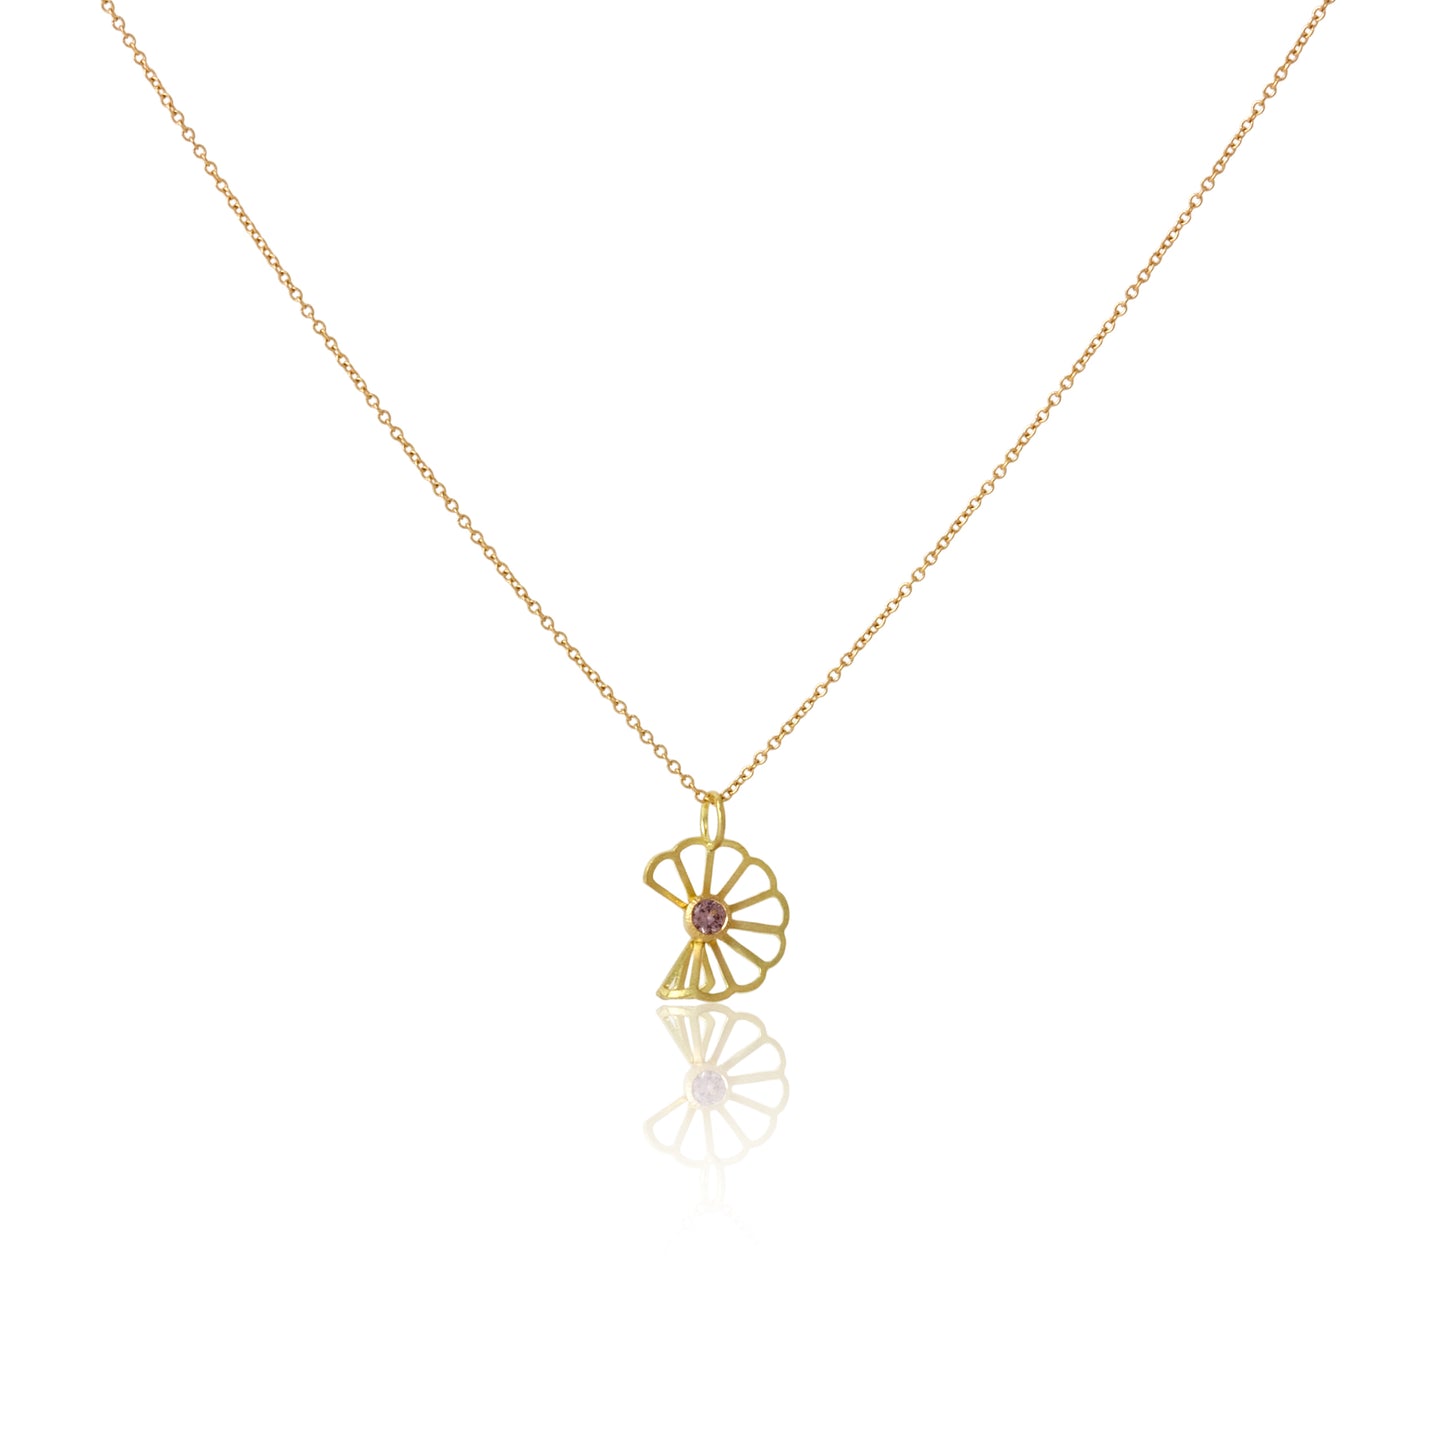 Petite Cloud Fold Necklace in 18k Yellow Gold with Malaya Garnet